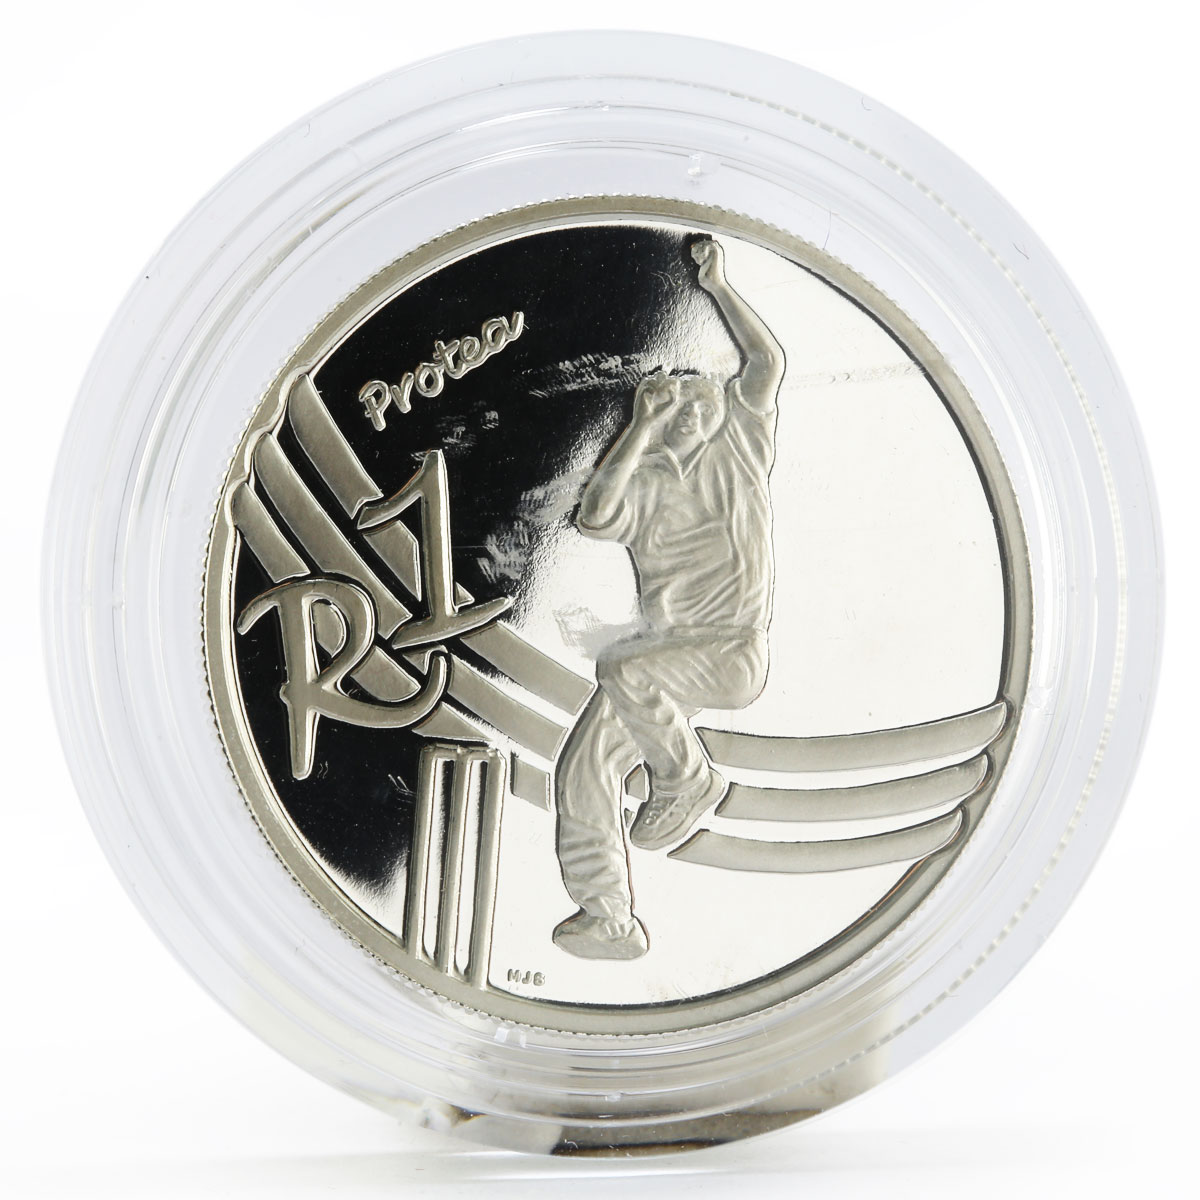 South Africa 1 rand Protea series Cricket World Cup proof silver coin 2003